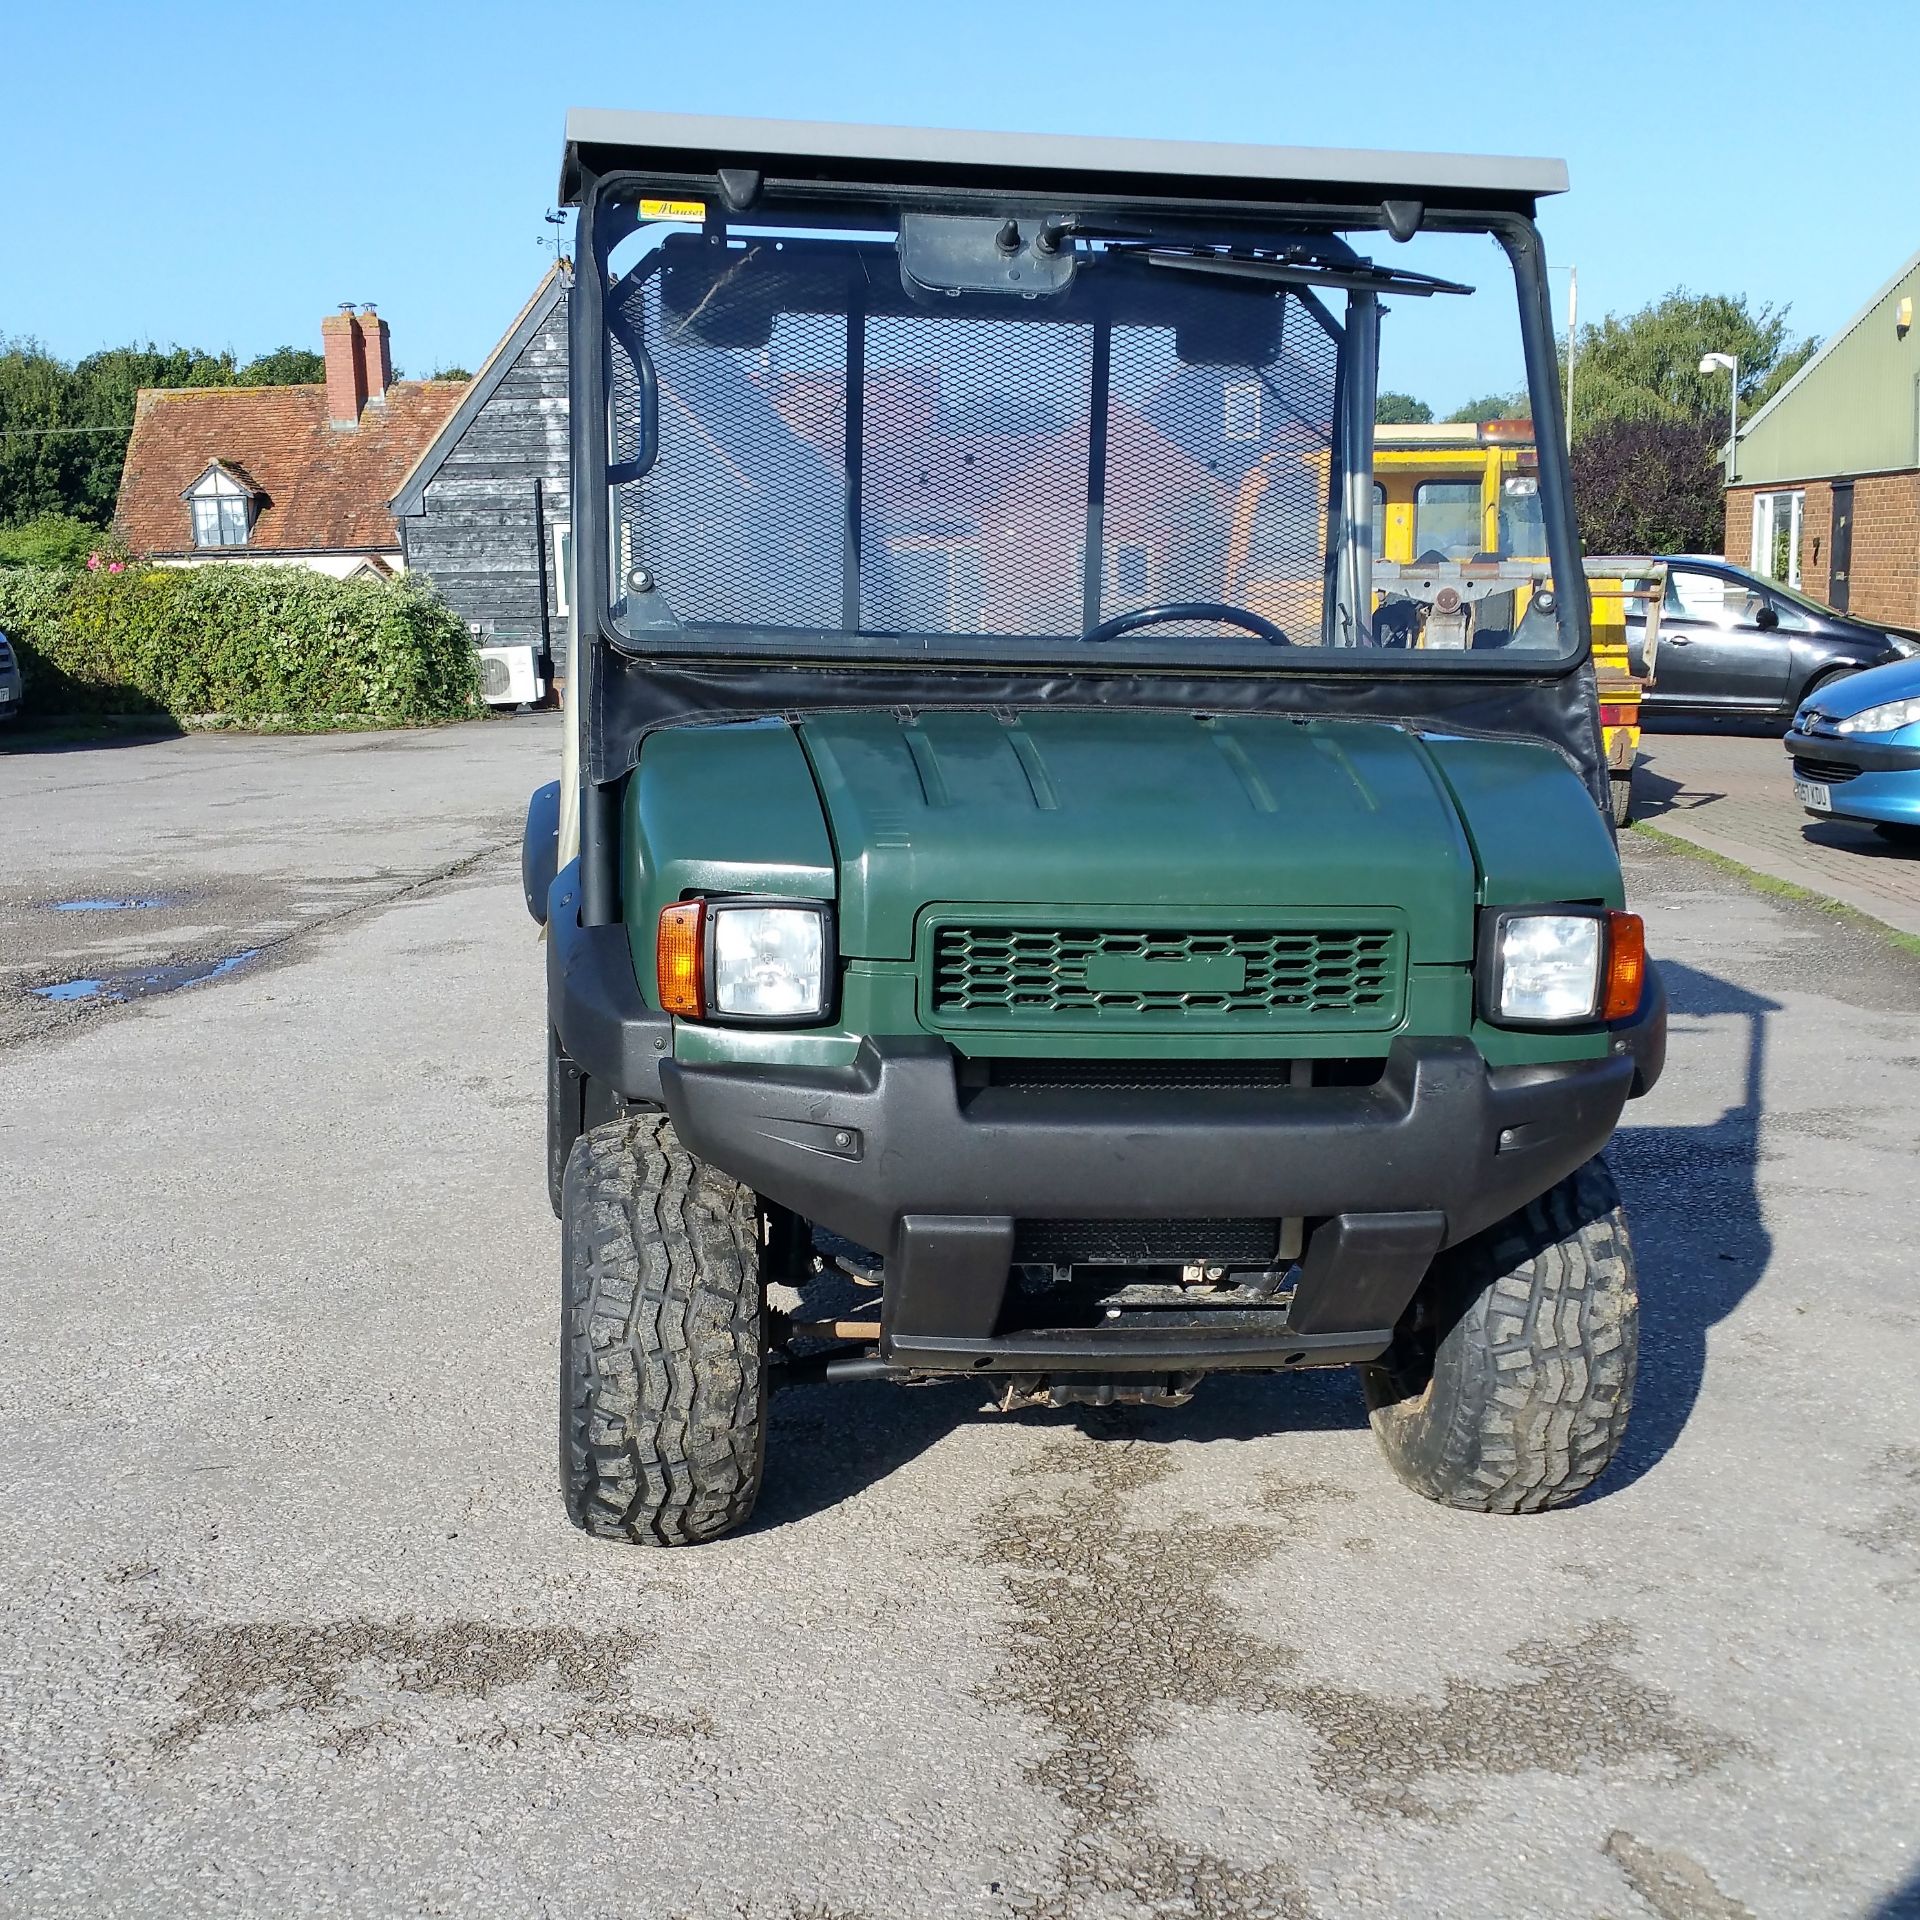 Kawasaki Mule 4010. Year 2009. Hours 1390. Power steering. Diff lock. Delivery can be arranged. - Image 4 of 6